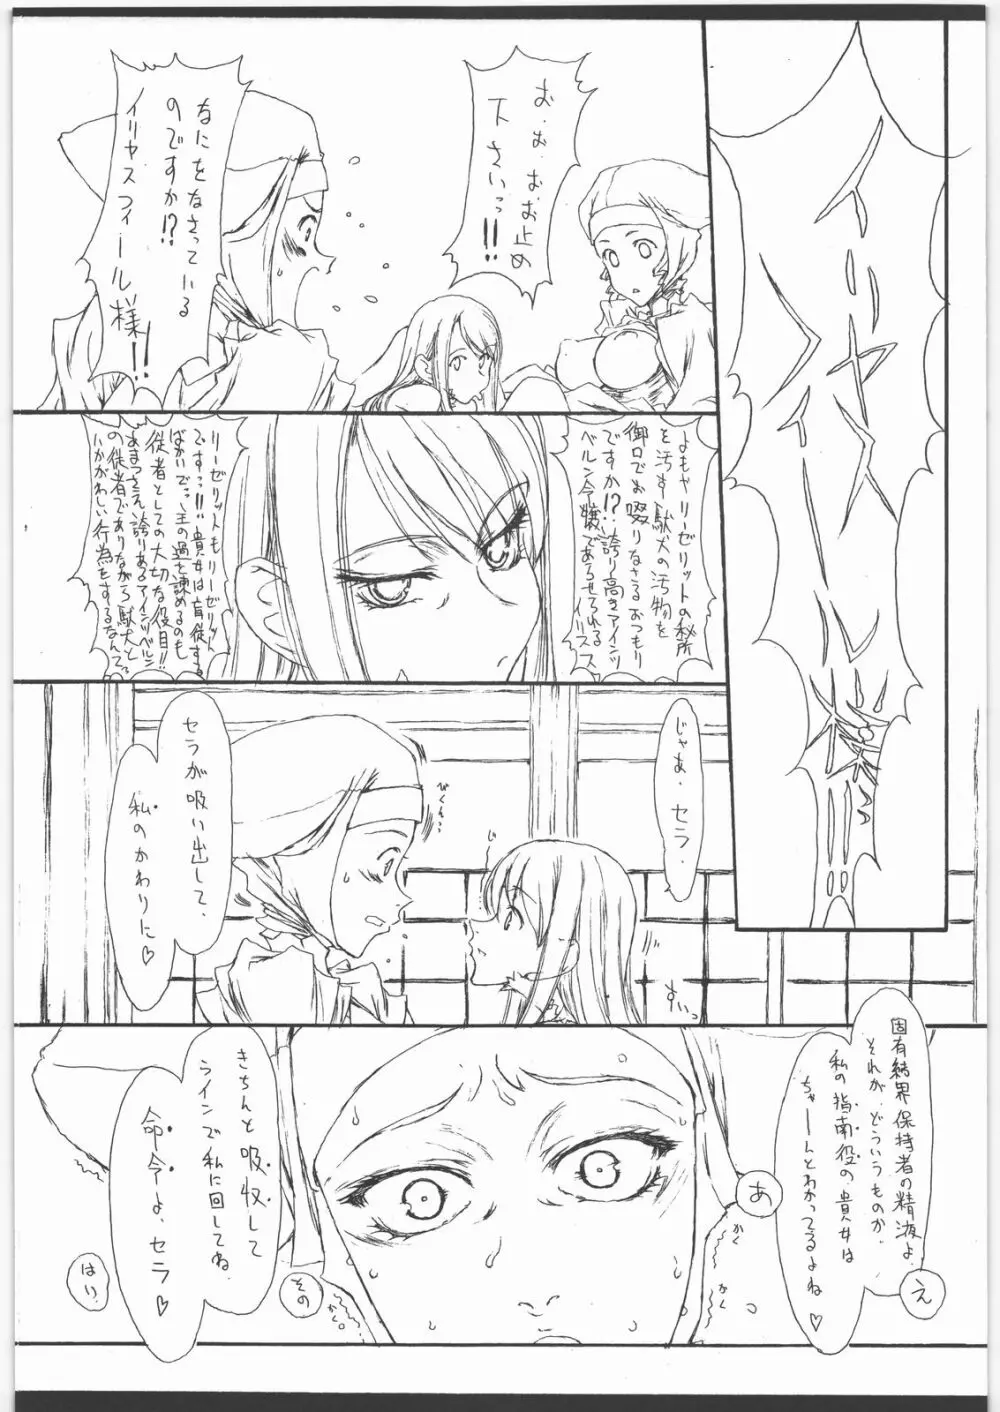 Melancholic Automaton 2 - One day at the castle of Einzbern Page.8